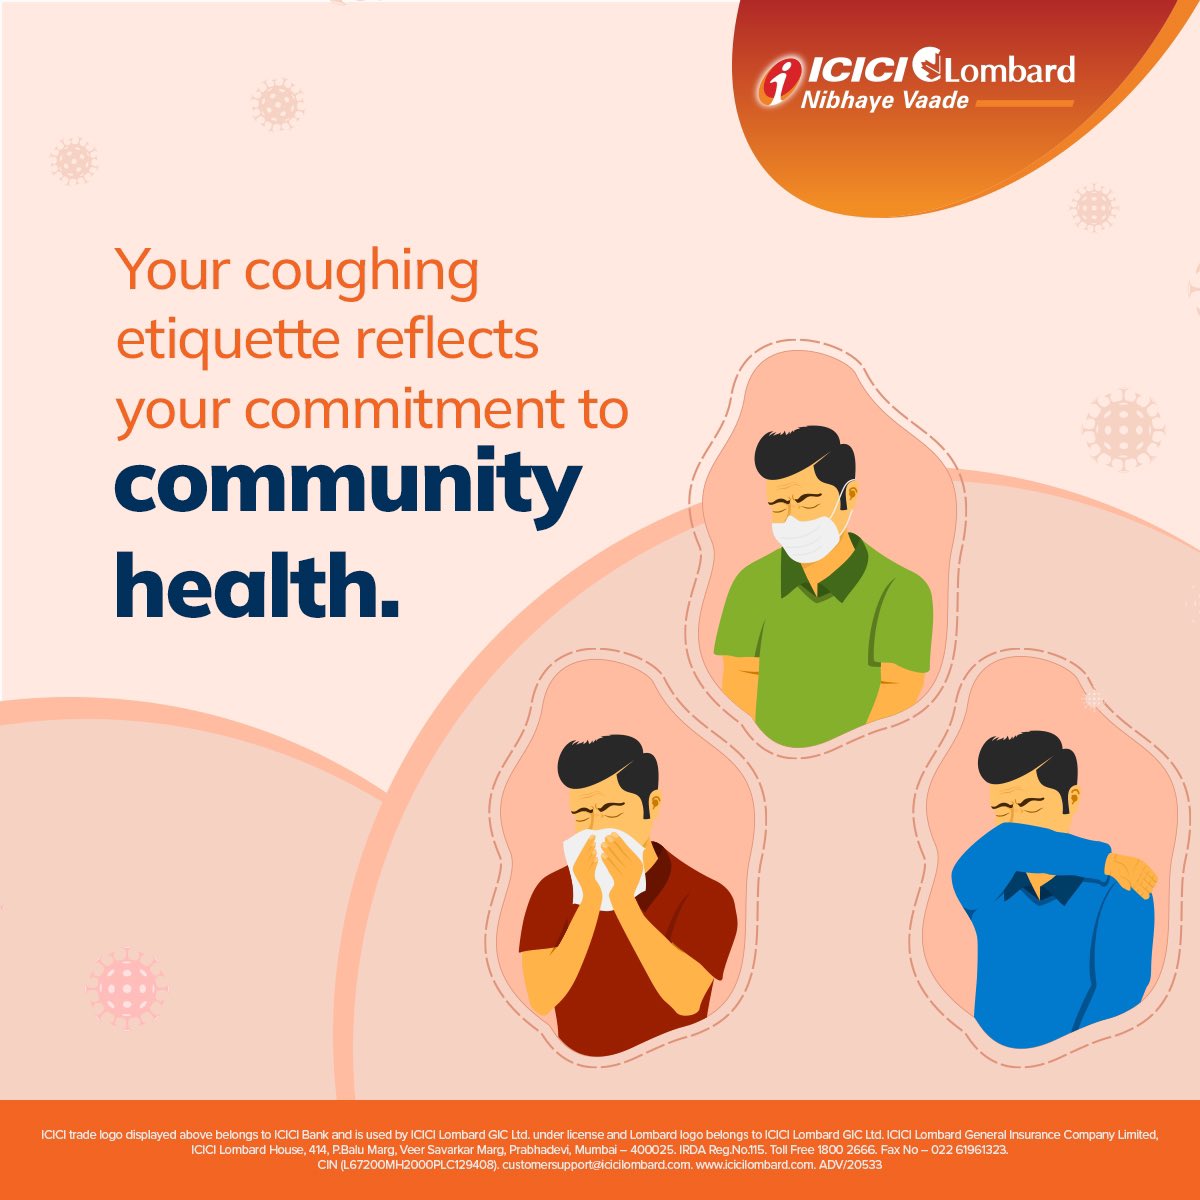 By covering your coughs and sneezes, you're not just being polite but actively contributing to the containment of illness. Keep sanitising your hands during a cold. #ICICILombard #NibhayeVaade #CovidSafety